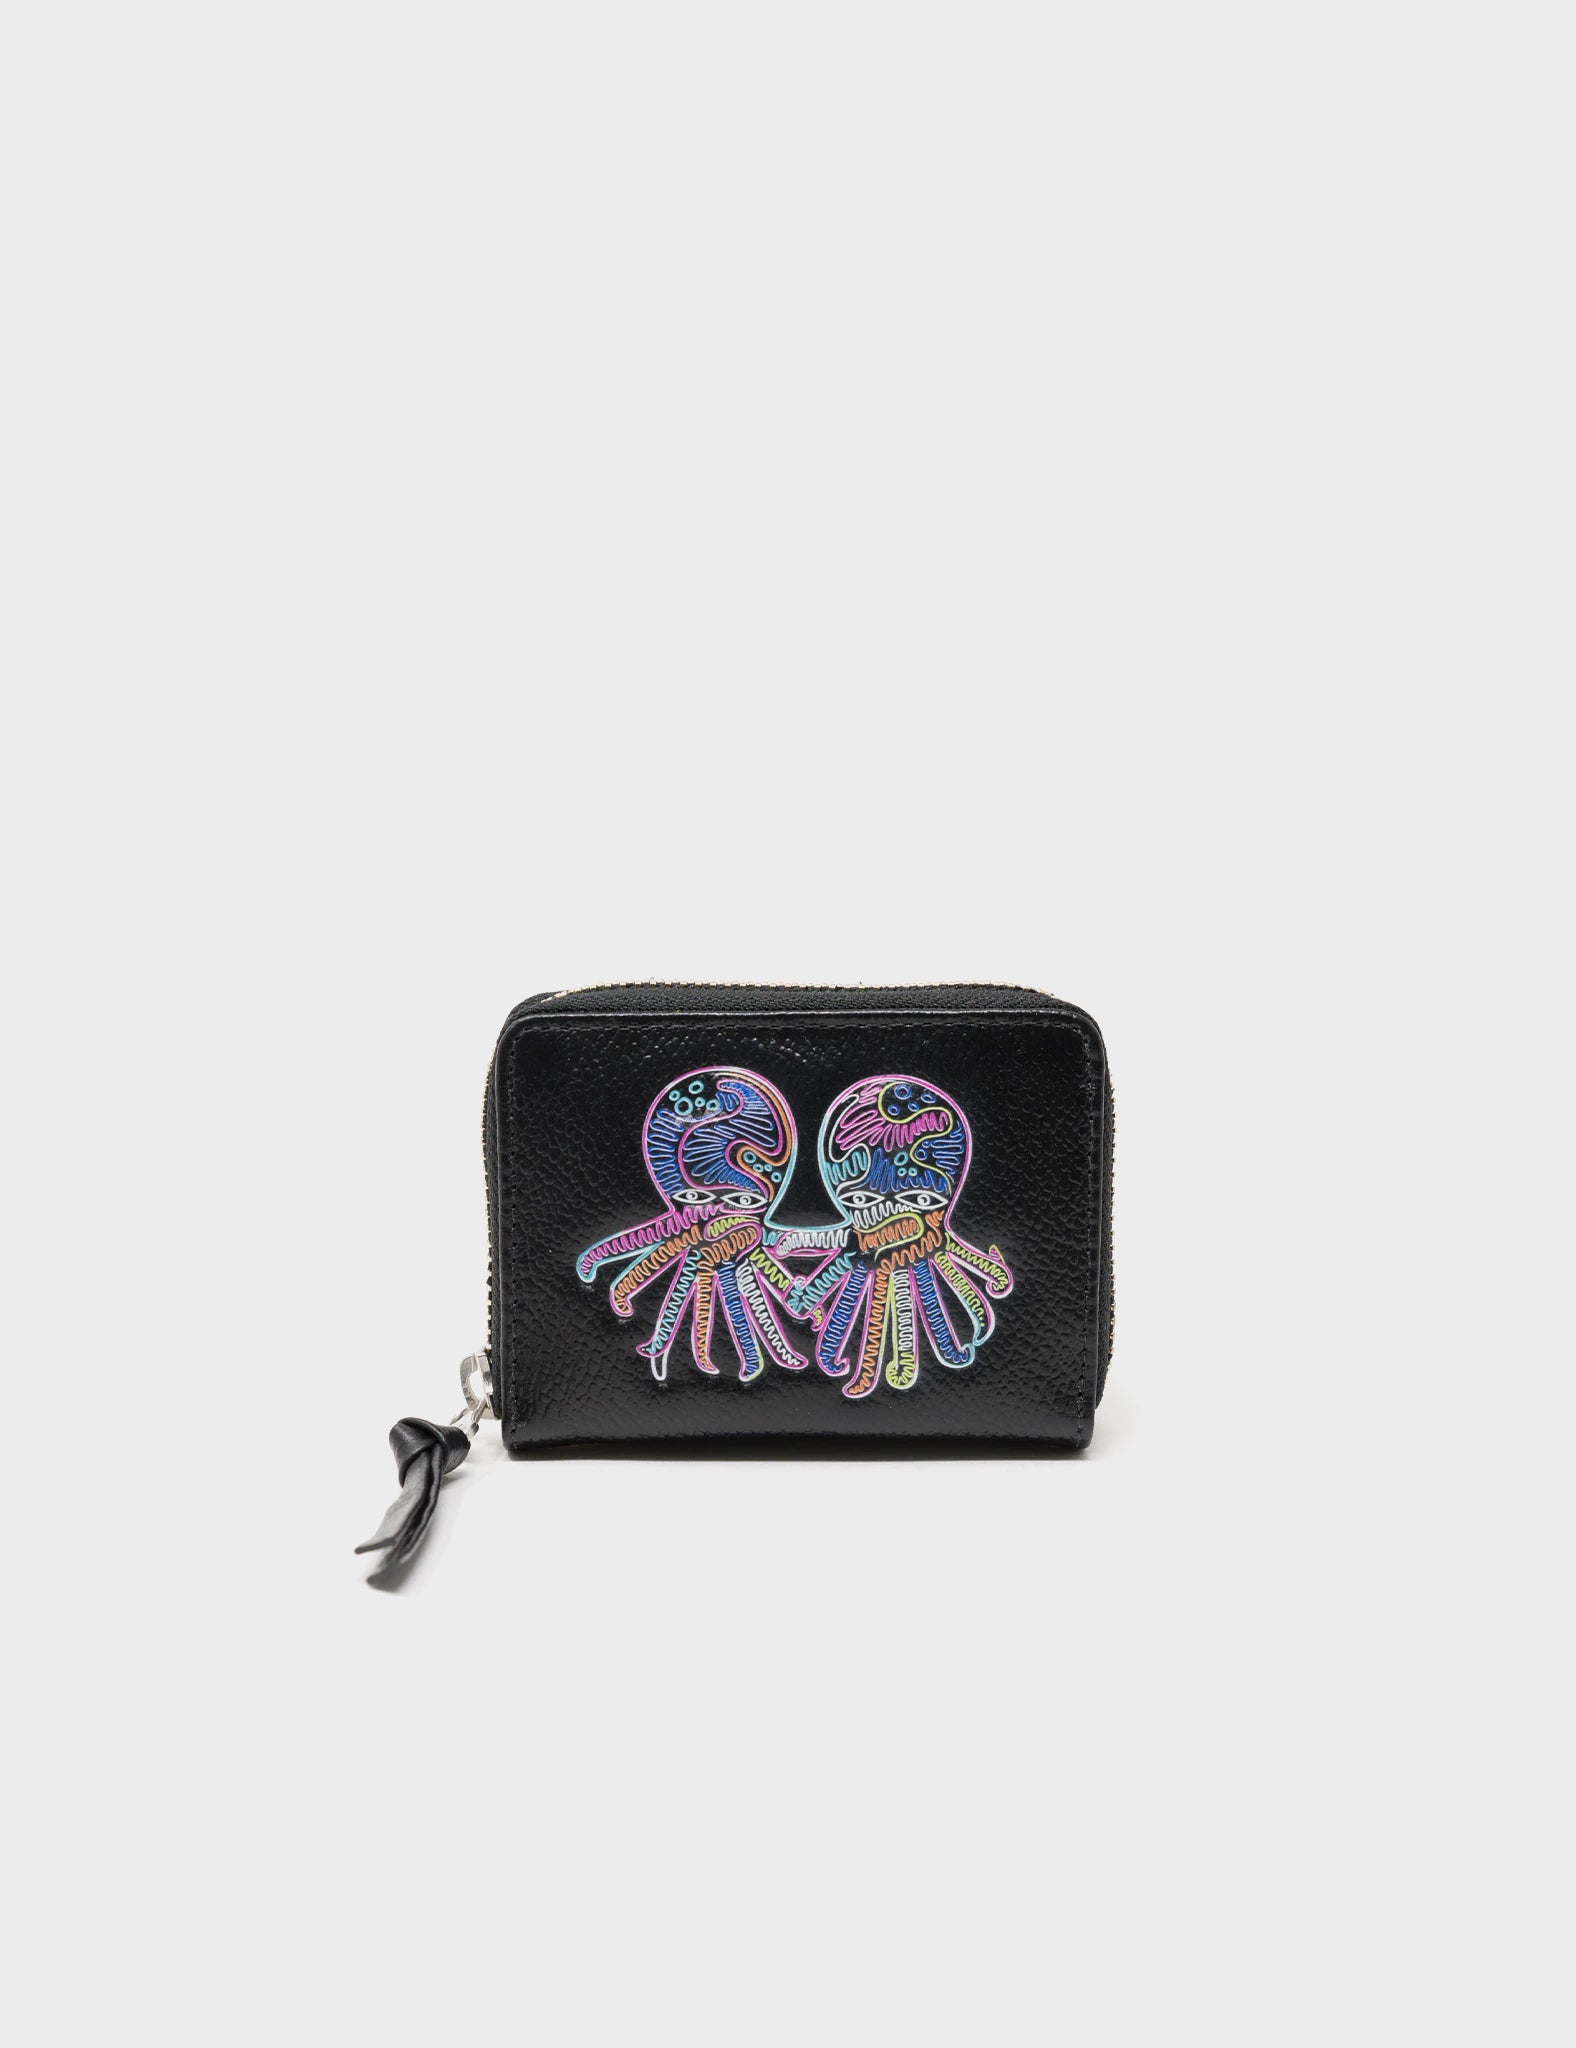 Zip around accordion wallet in black leather colorful octopus design